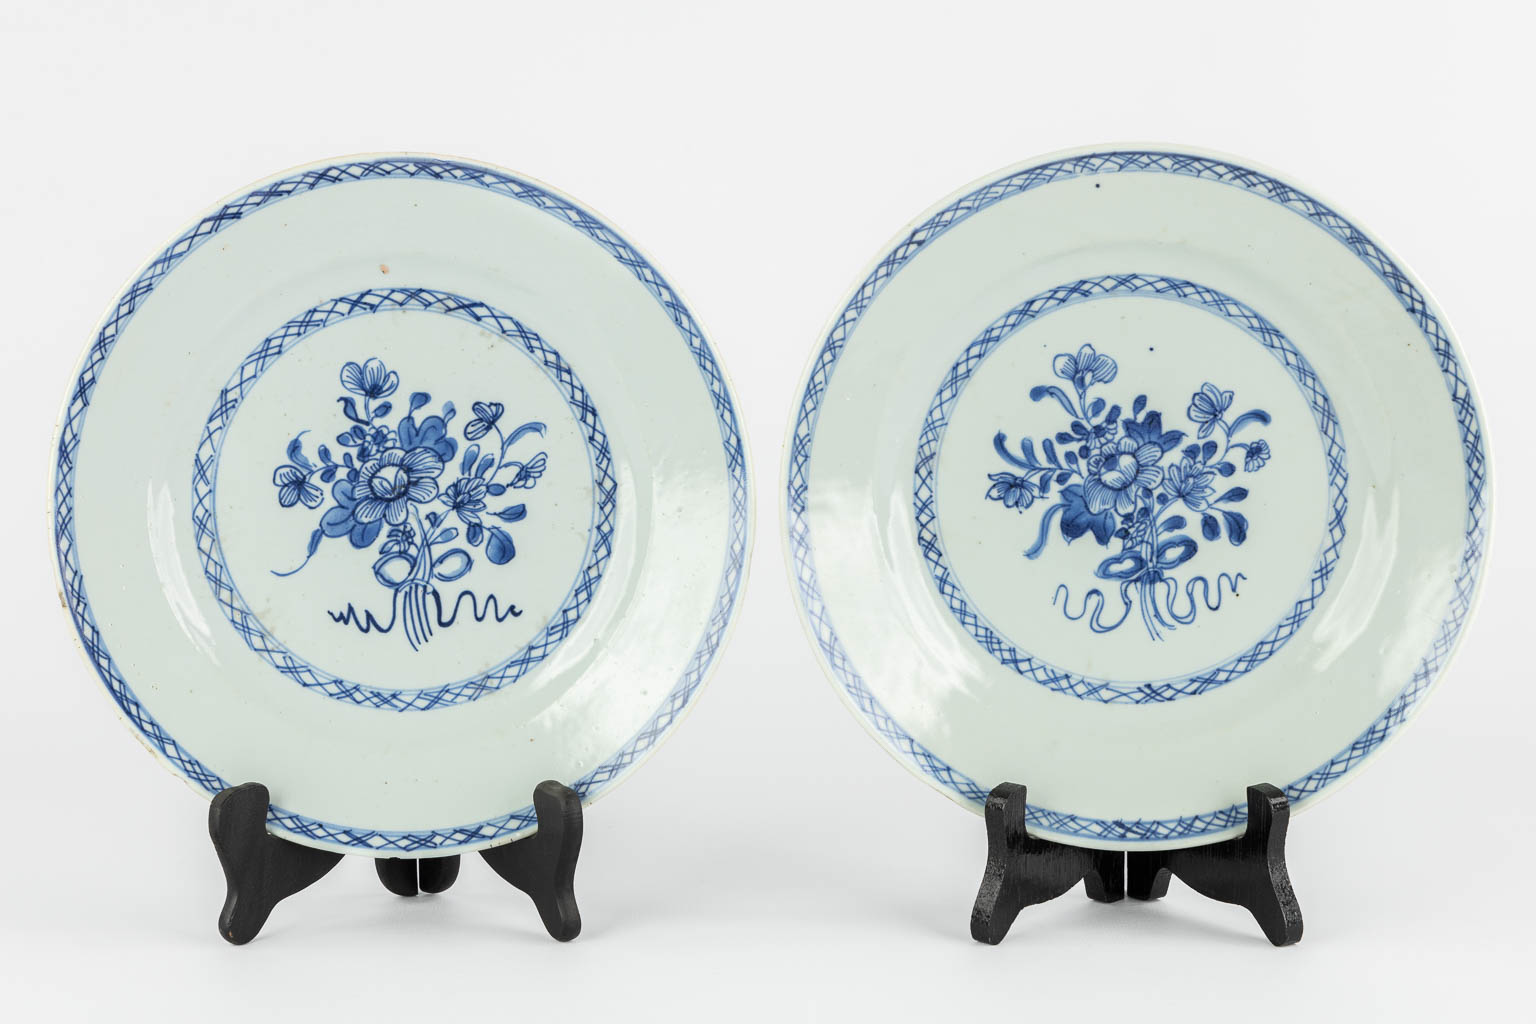 Four Chinese plates with a blue-white decor. (D:24 cm)